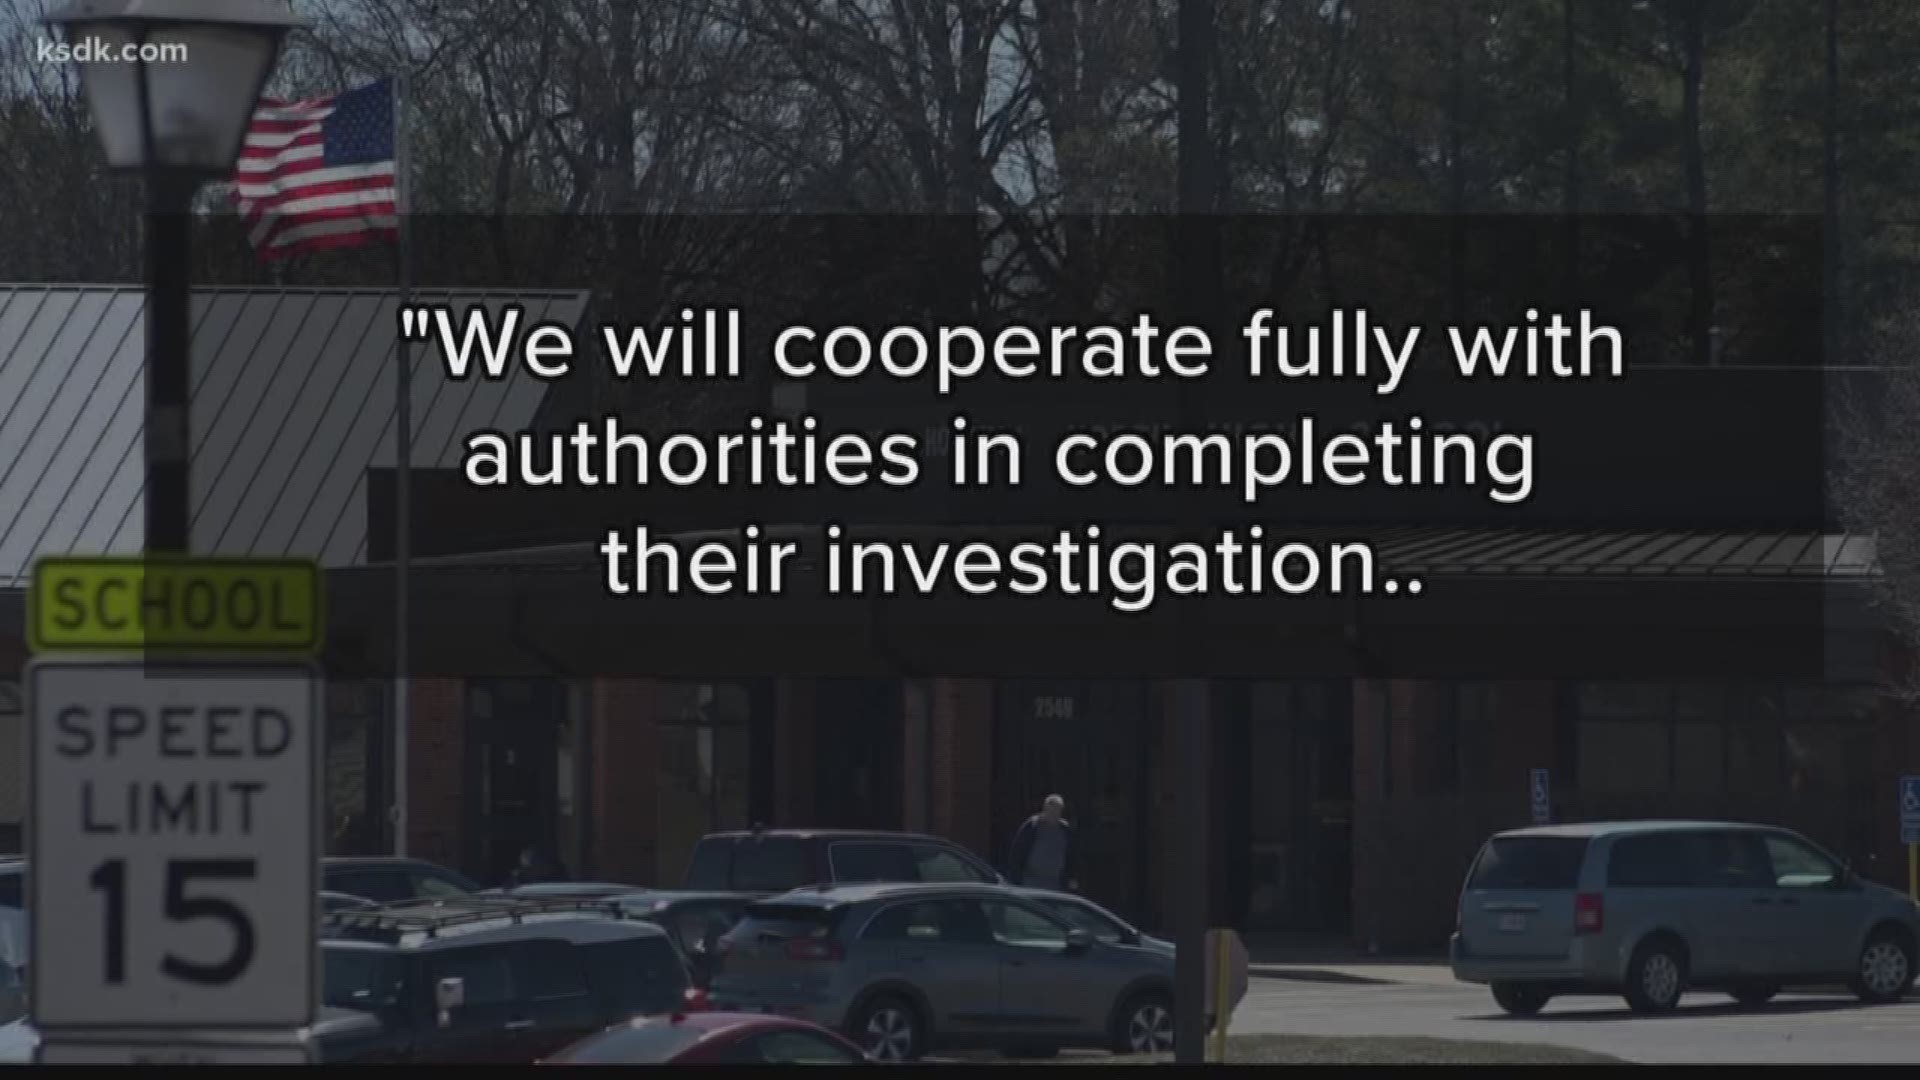 District officials said they're "cooperating with authorities in completing their investigation." The teacher has been placed on administrative leave.